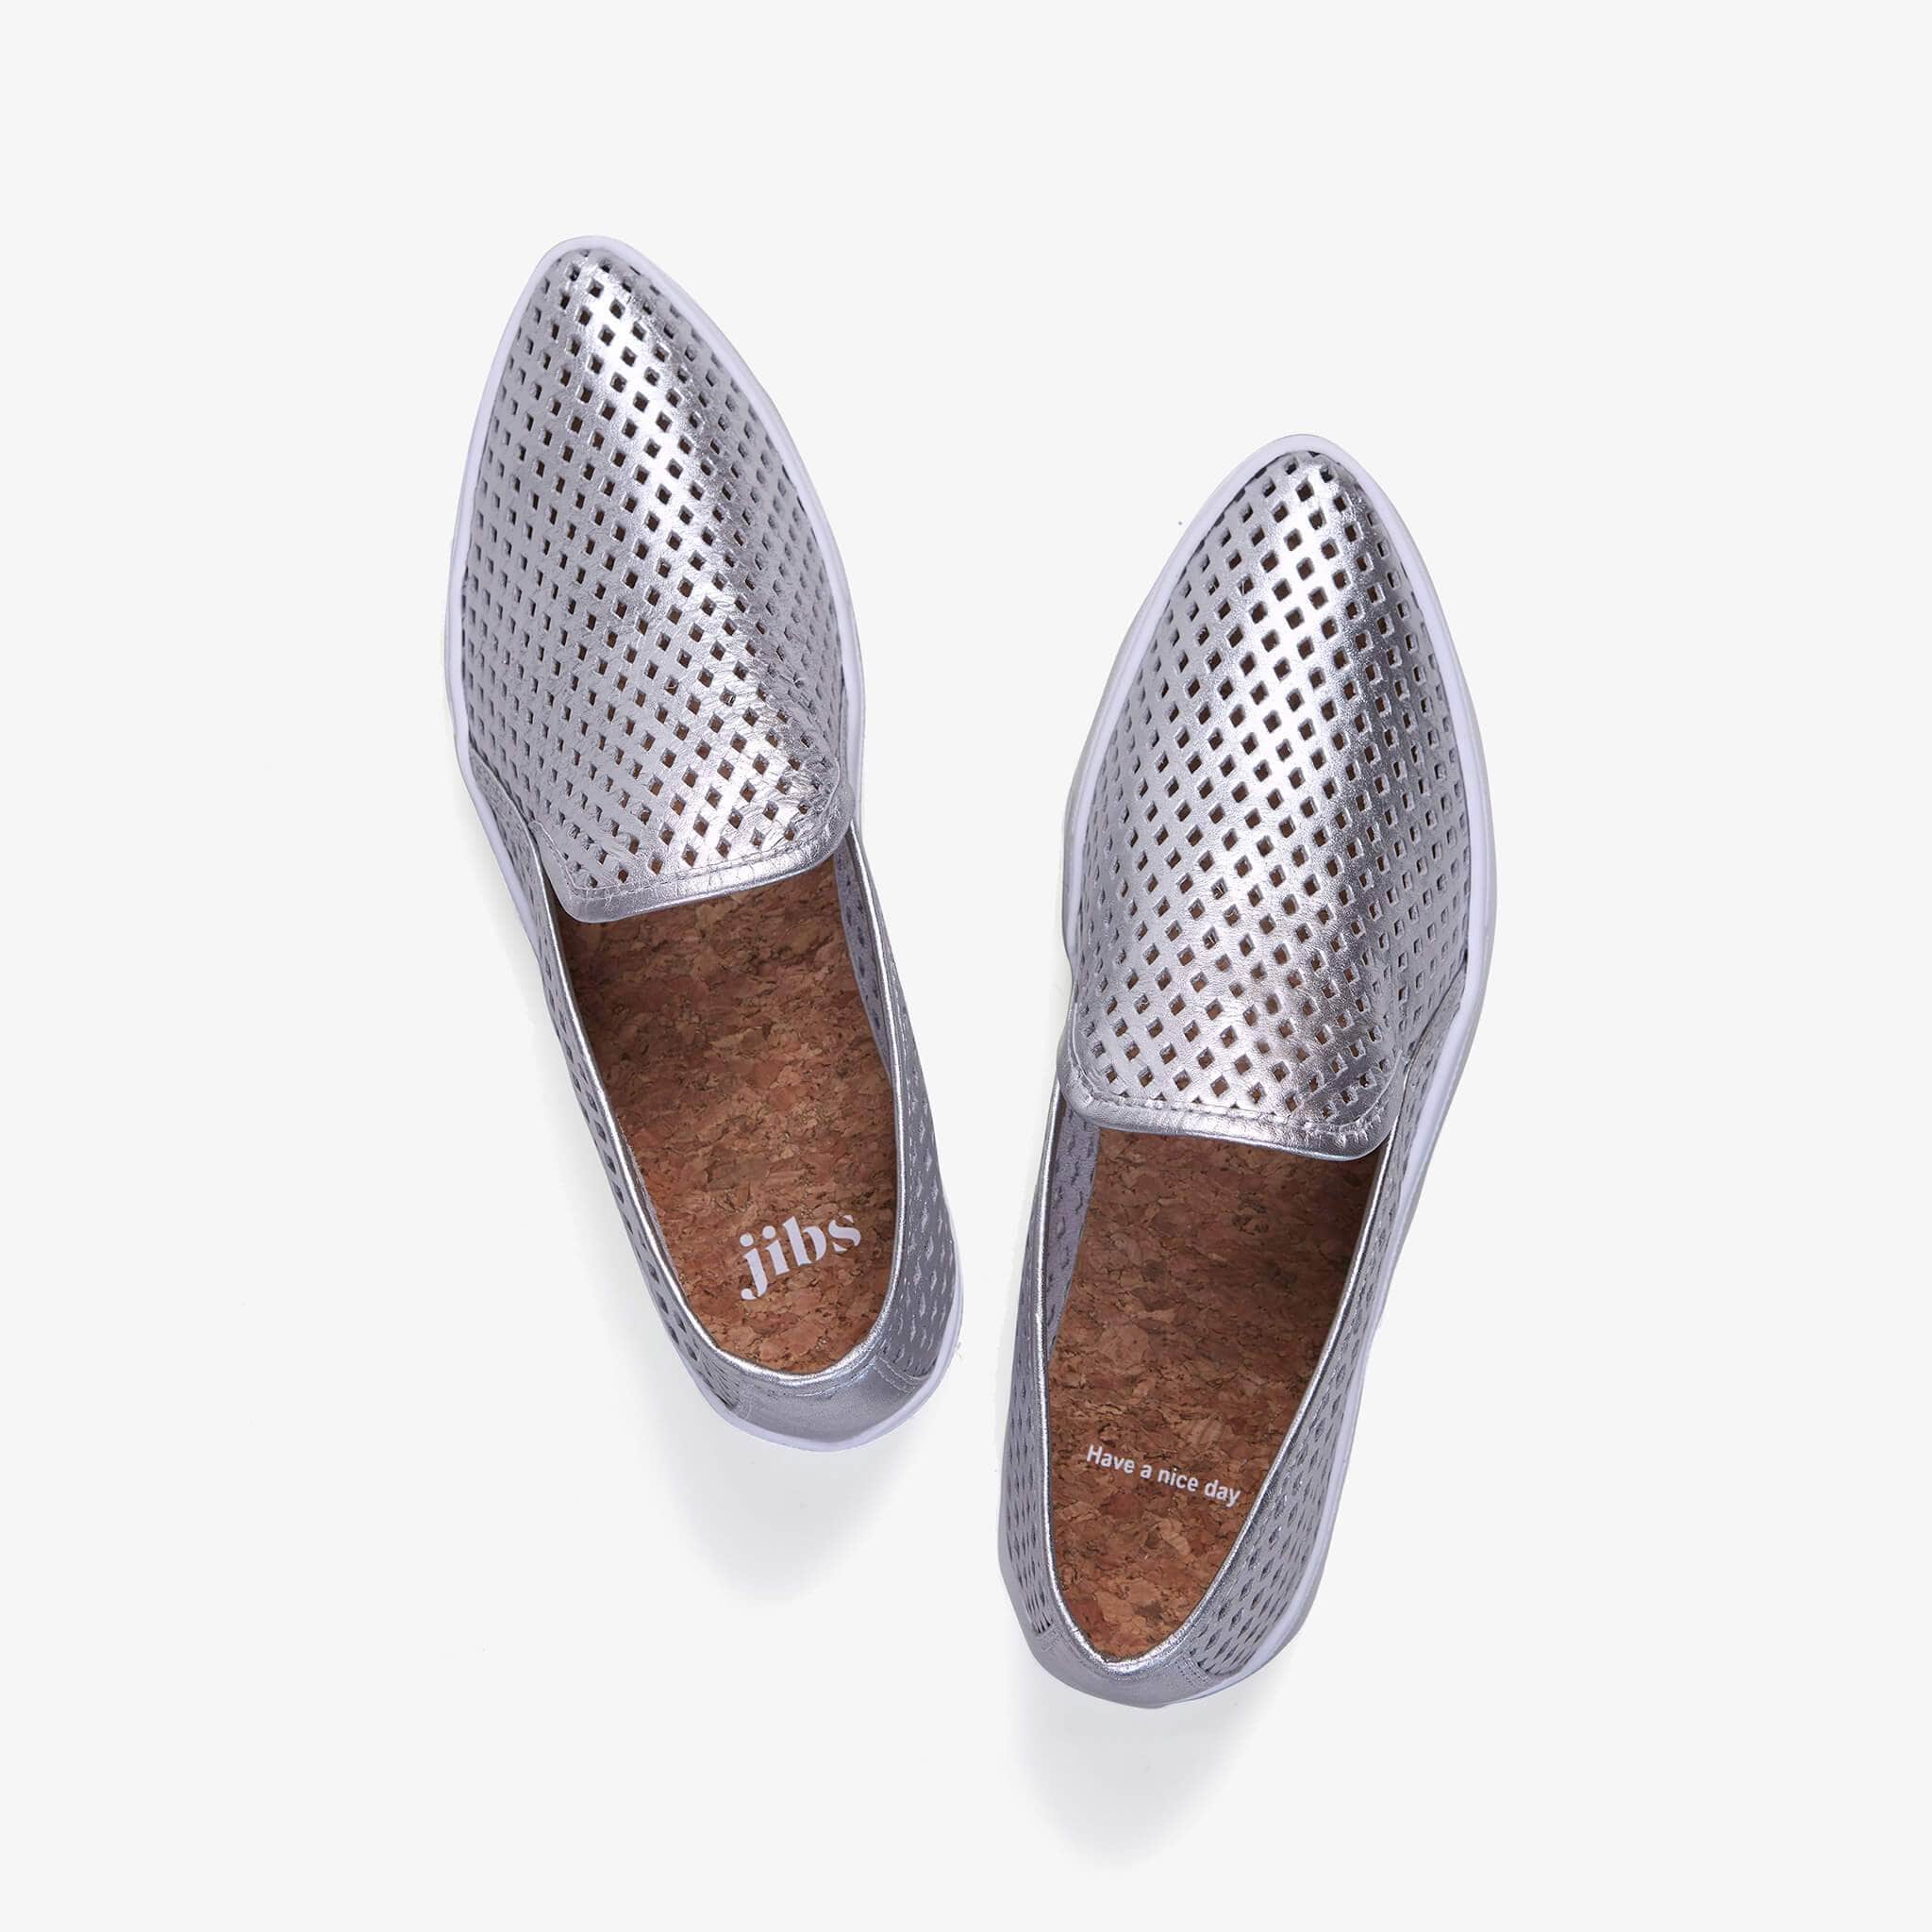 Jibs Slim Silver Slip On Sneaker Flat Top Have A Nice Day